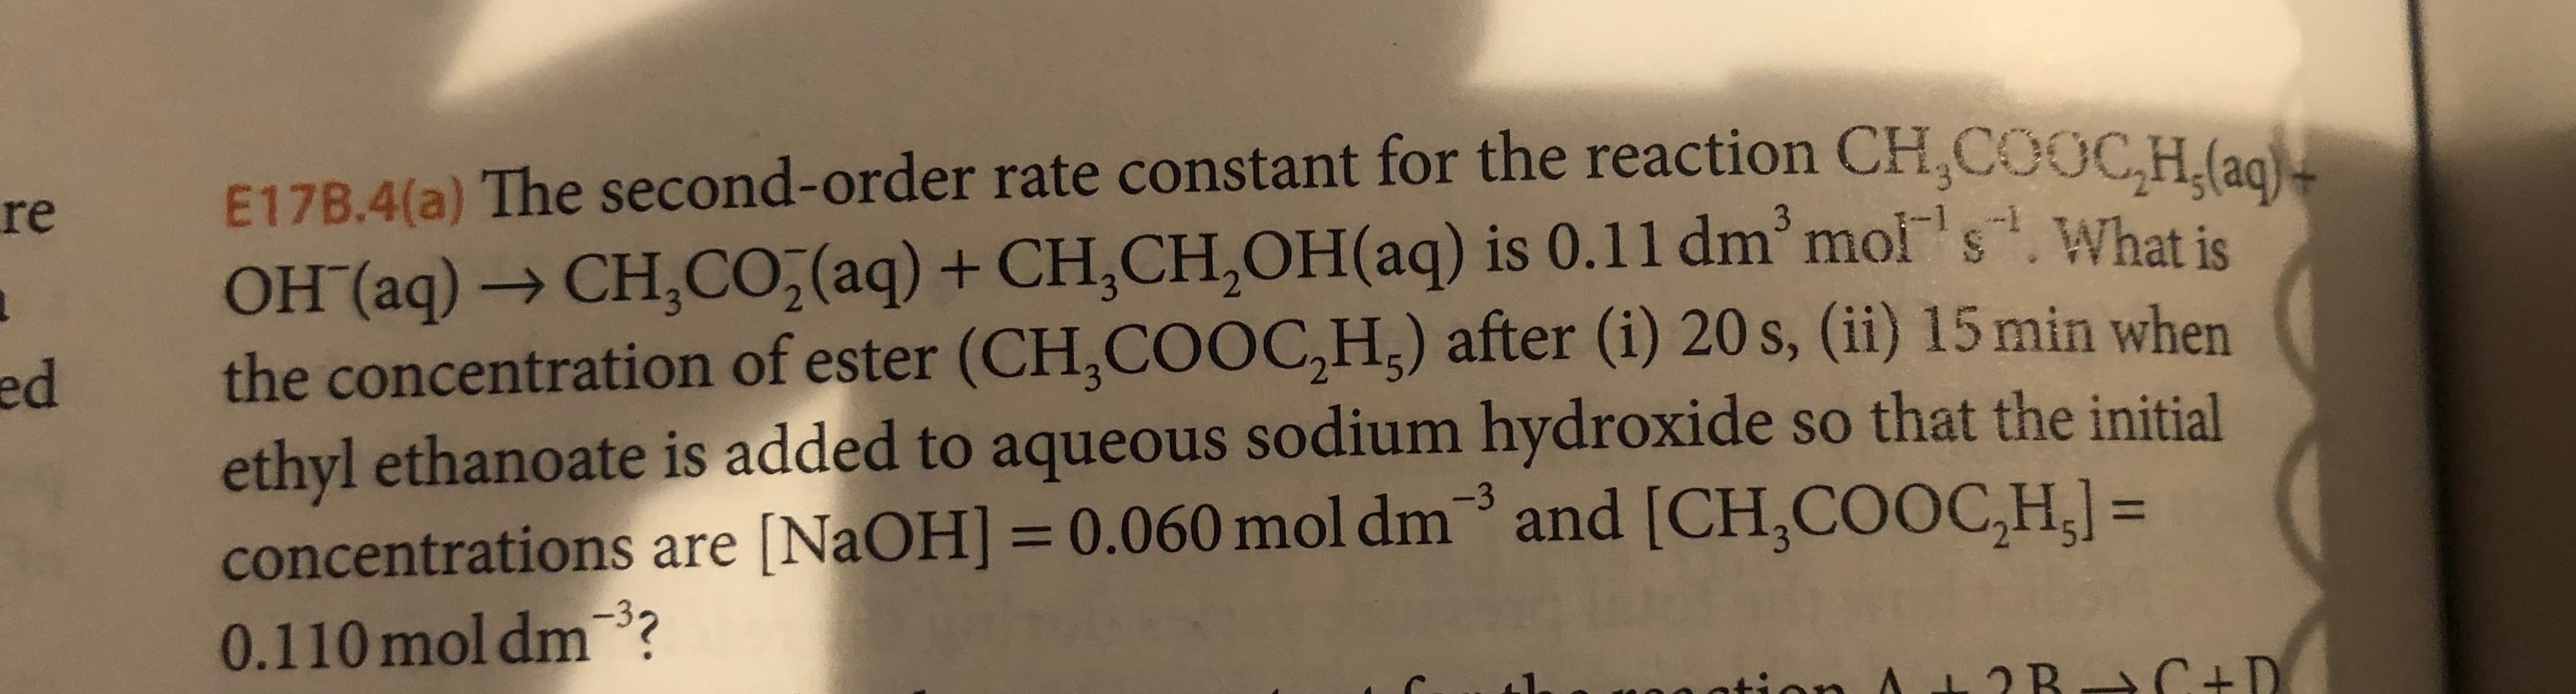 E17B.4(a) The second- order rate constant for the reaction CH,COOCH. (aa
OH (aq)CH, CO,(aq) + CH,CH2OH ( aq) is 0.11 dm mois.What is
the concentration of ester (CH,COOC,H) after (i) 20 s, (ii) 15 min when
ethyl ethanoate is added to aqueous sodium hydroxide so that the initial
concentrations are [NaOH] 0.060 mol dm and [CH,COOC,H,] =
0.110 mol dm3?
re
ed
-3
3
AL2R C +D
ation
